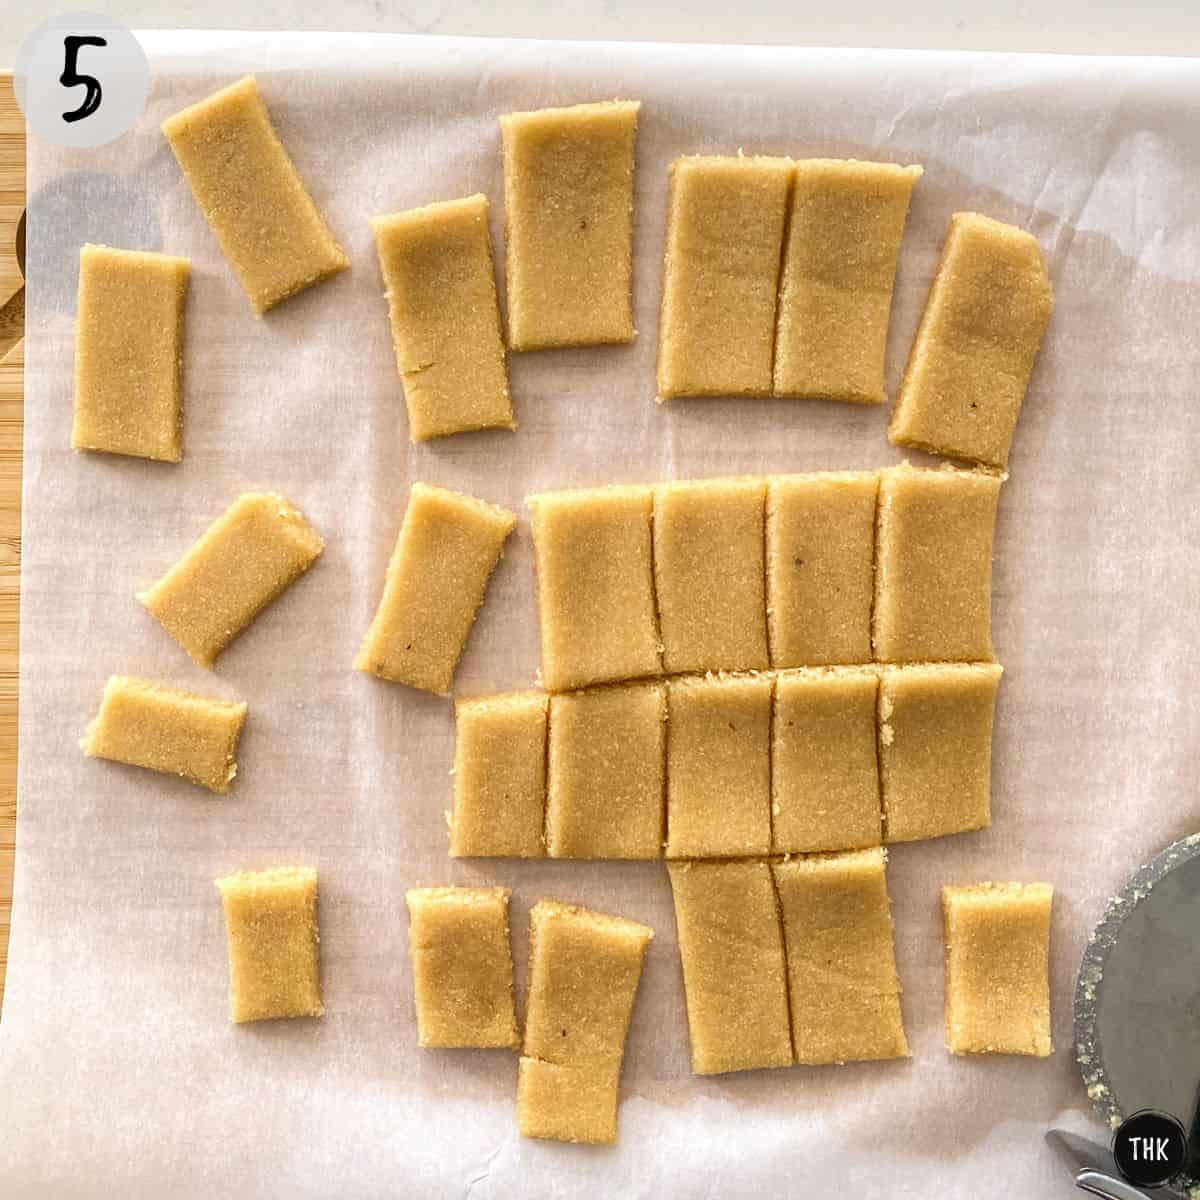 Rectangular cut outs of stretched dough with pizza cutter beside them.